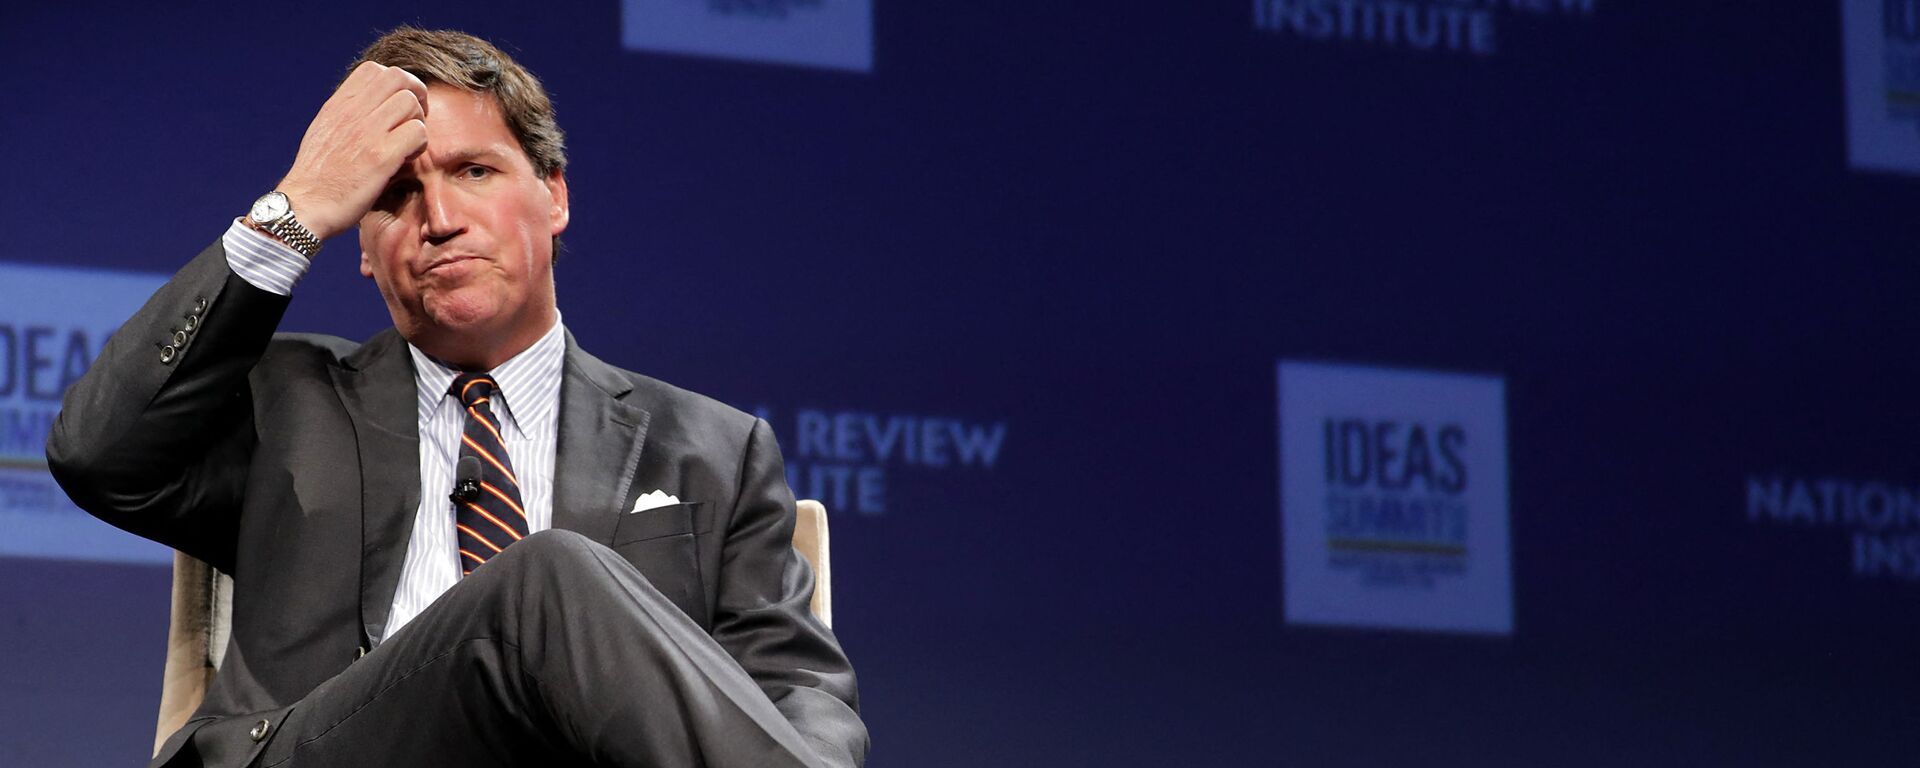 WASHINGTON, DC - MARCH 29: Fox News host Tucker Carlson discusses 'Populism and the Right' during the National Review Institute's Ideas Summit at the Mandarin Oriental Hotel March 29, 2019 in Washington, DC. - Sputnik International, 1920, 08.05.2023